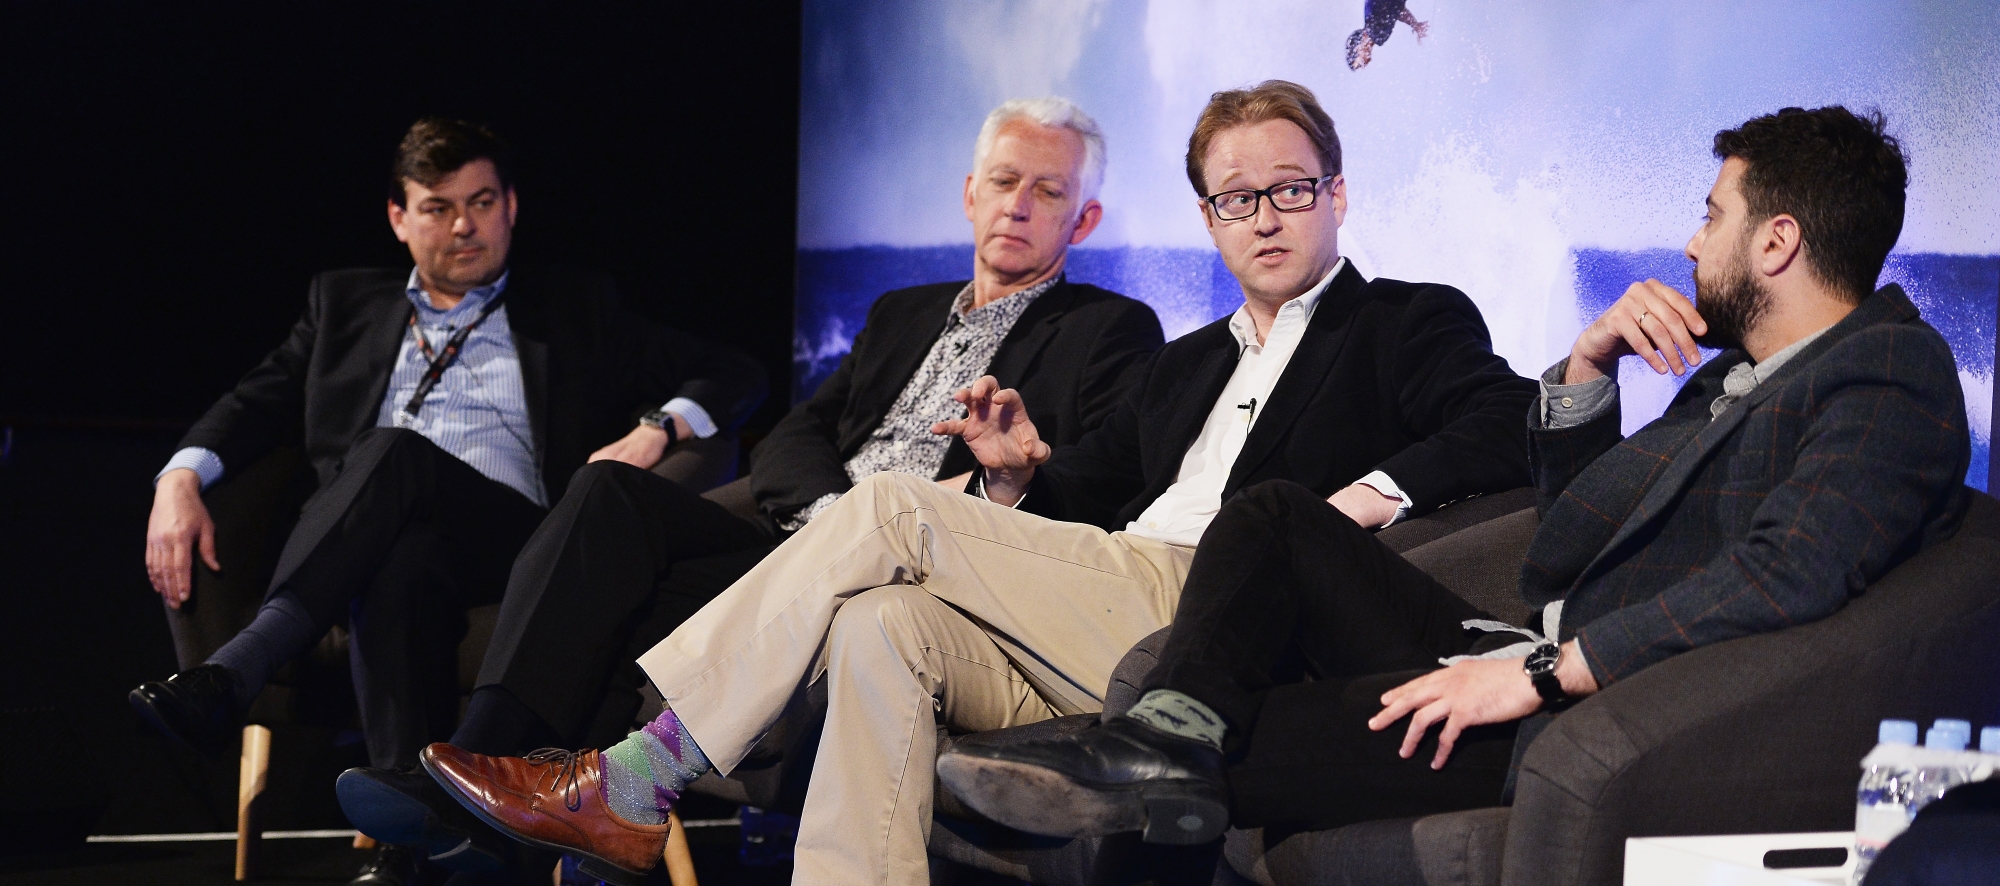 Bob Wootton, Nick Baughan and Rotem Dar on the 'Economics of Ad Blocking' panel